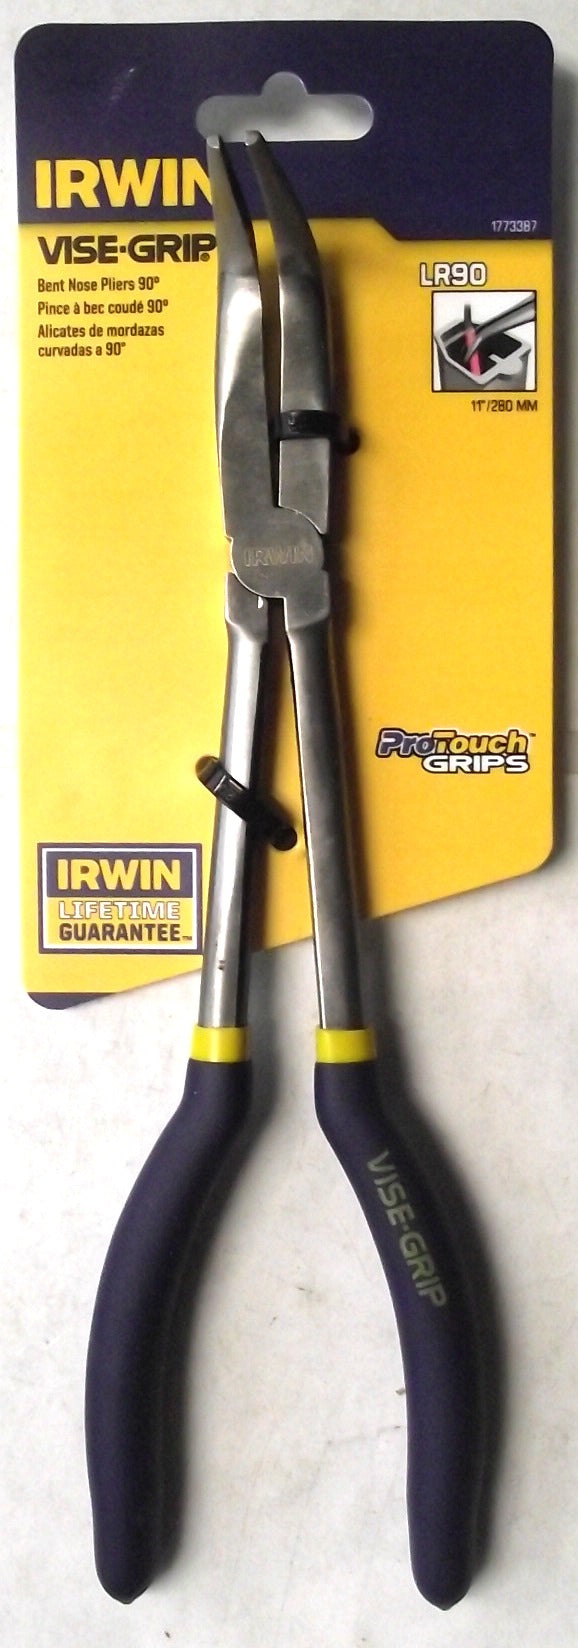 IRWIN Tools 1773387 90 Degree 11" Vise Grip Long Reach Bent Nose Pliers